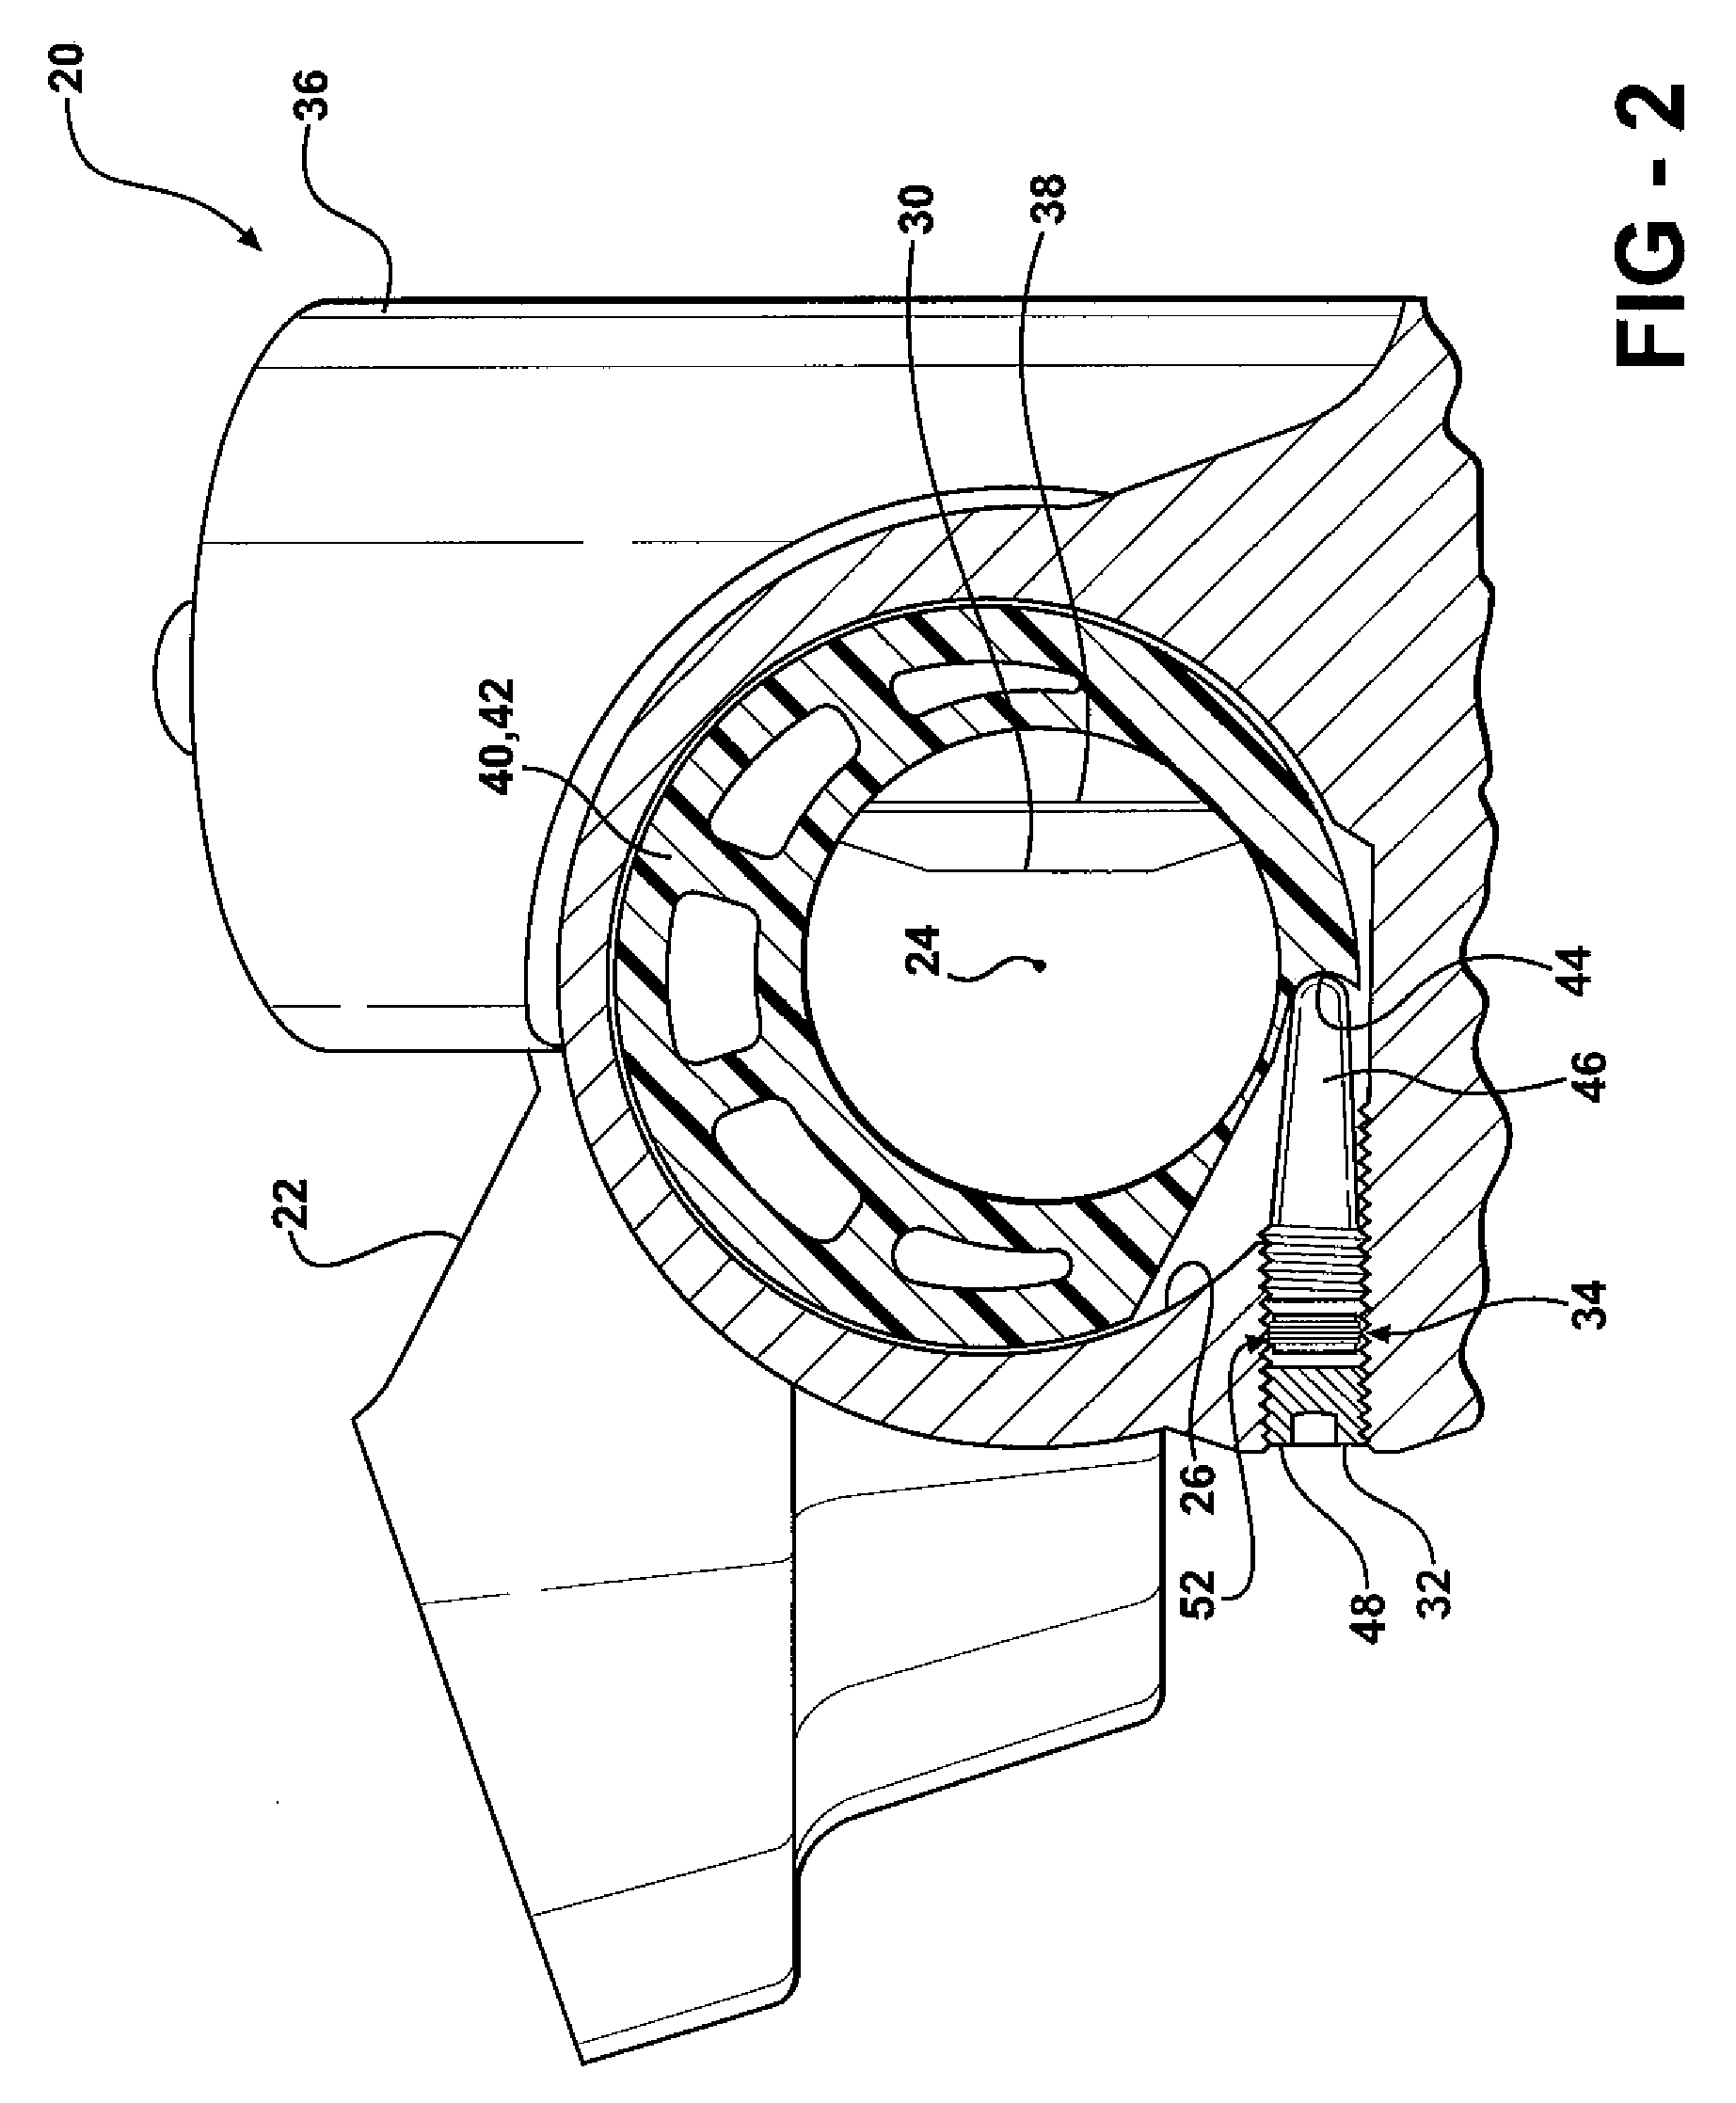 Rack and pinion steering apparatus having rack bearing wear compensation with damping